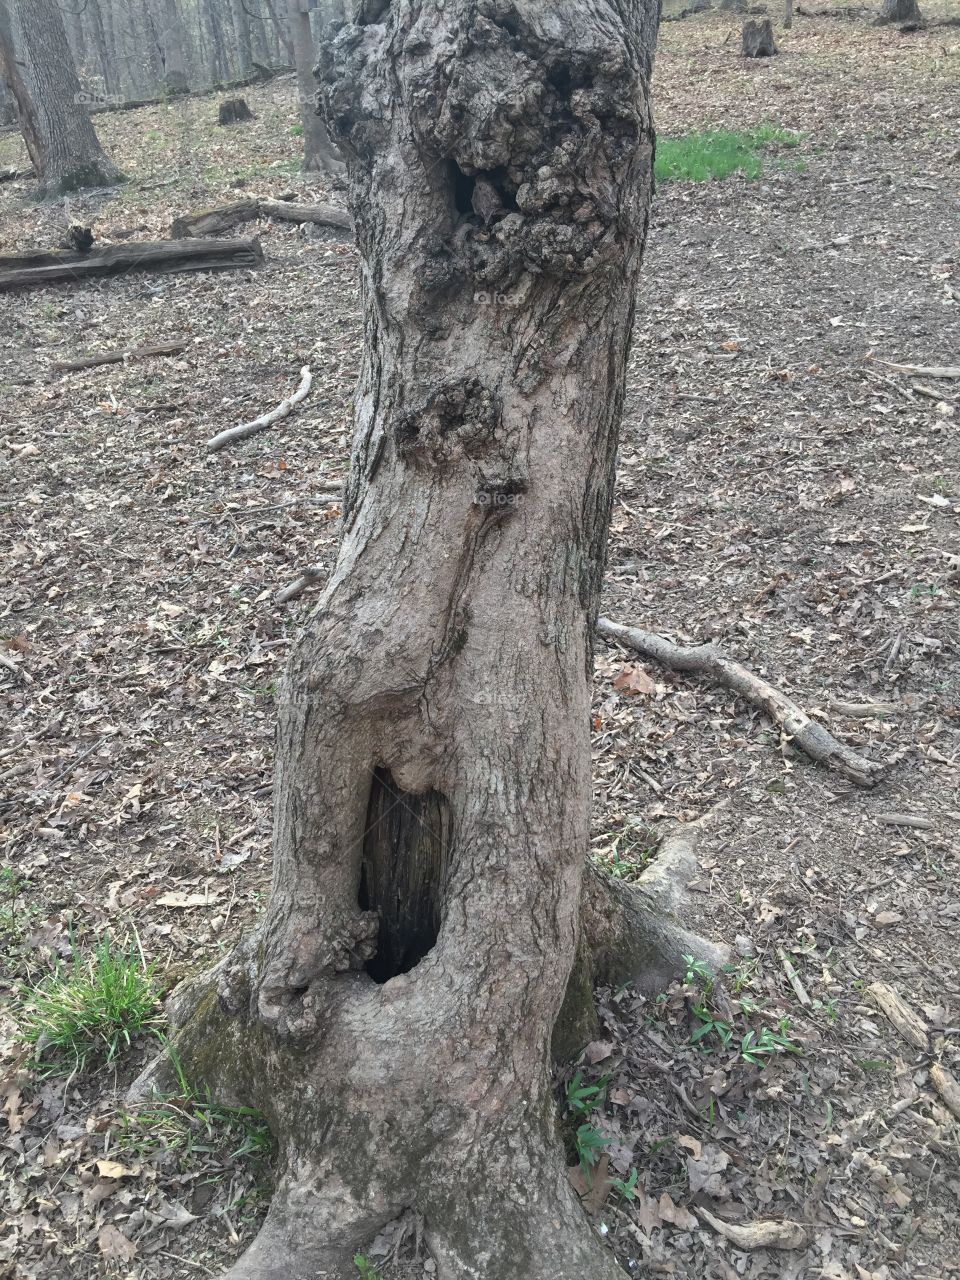 Cool tree in our woods